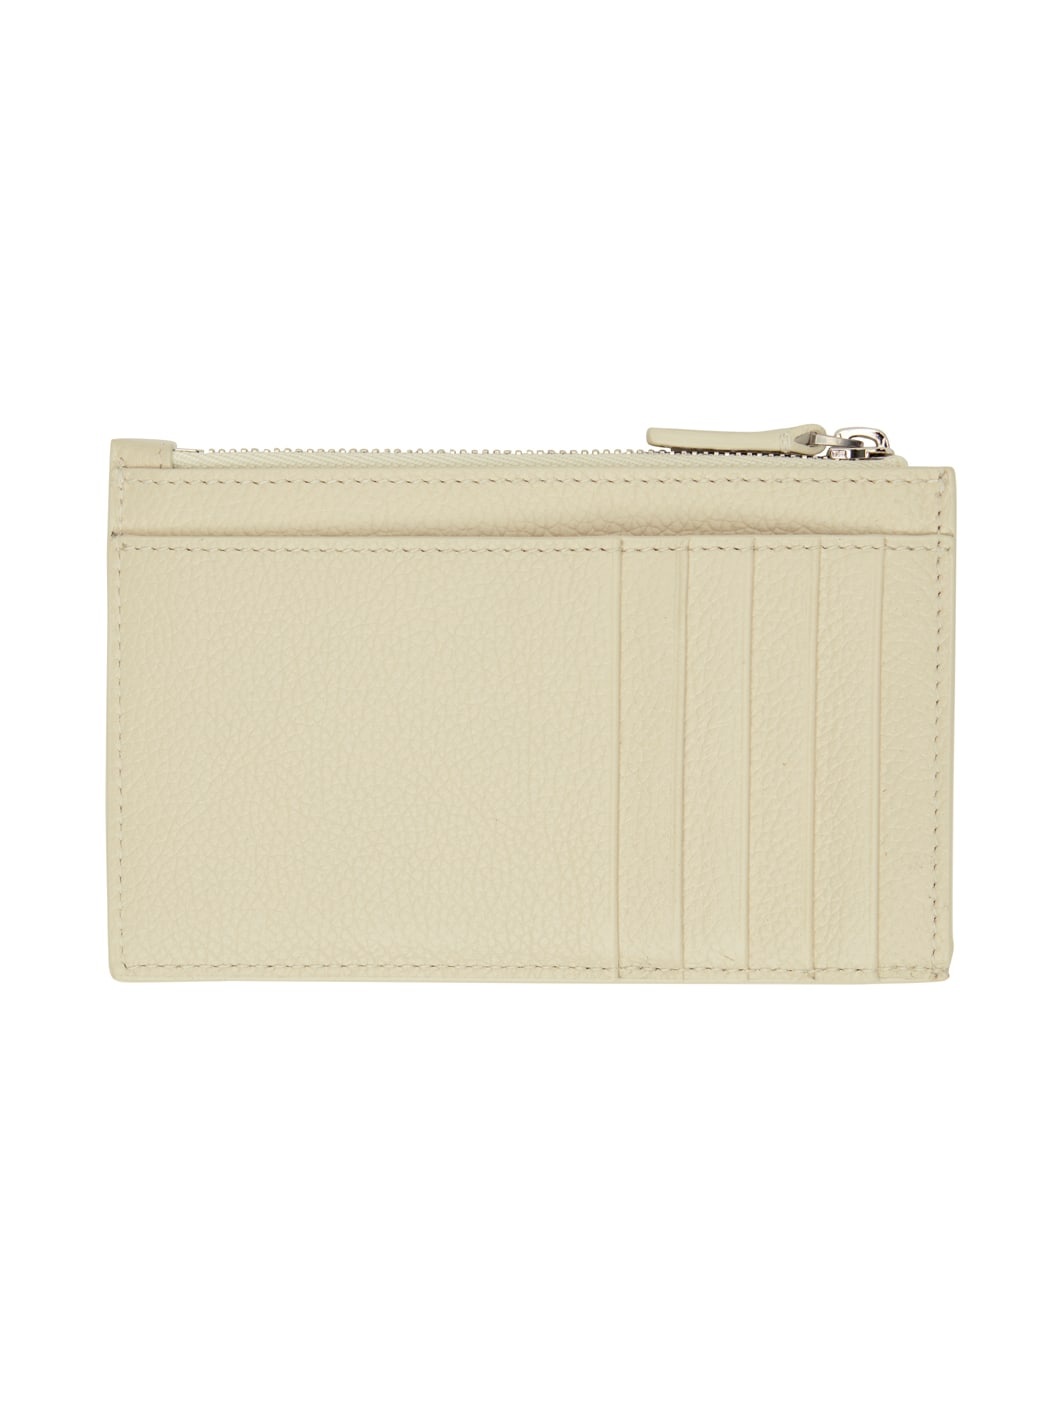 Off-White Cash Large Long Coin & Card Holder - 2